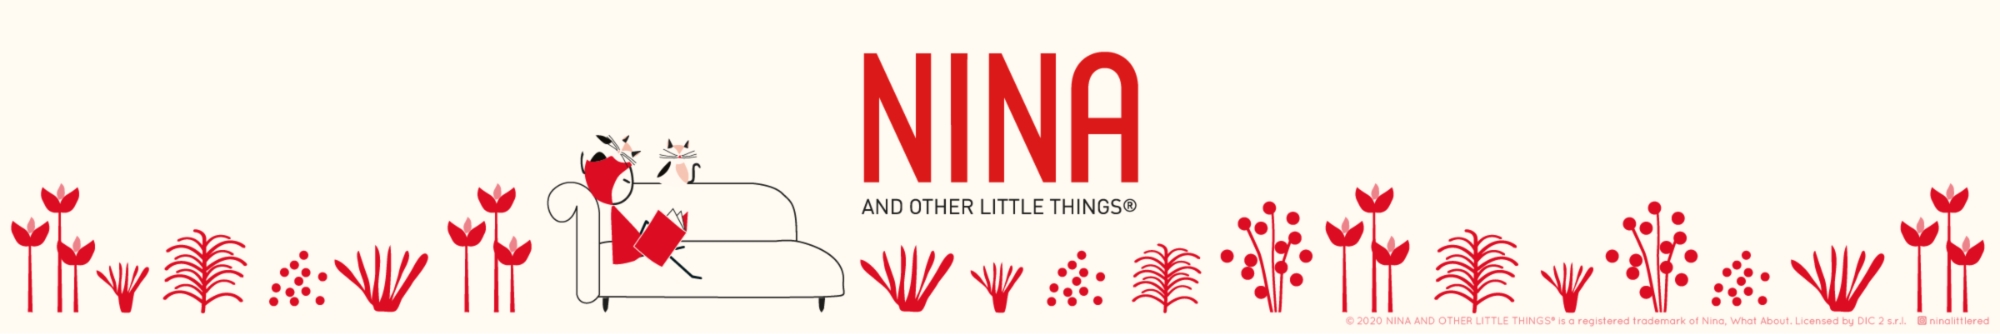 Showroom - NINA and other little things